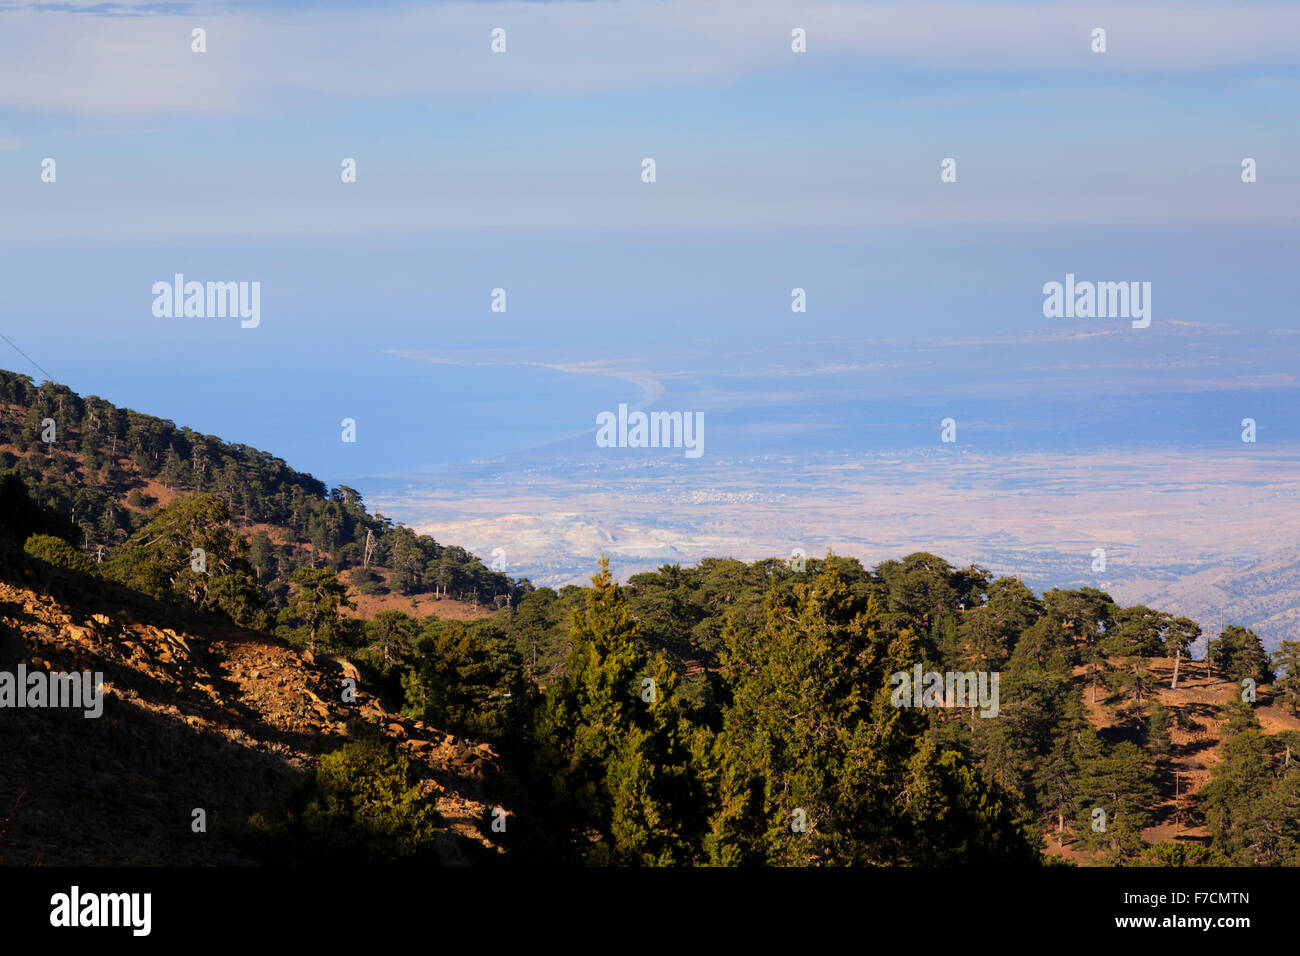 Veiw of Morfou Bay from the top of the Troodos Mountains, Cyprus. Stock Photo